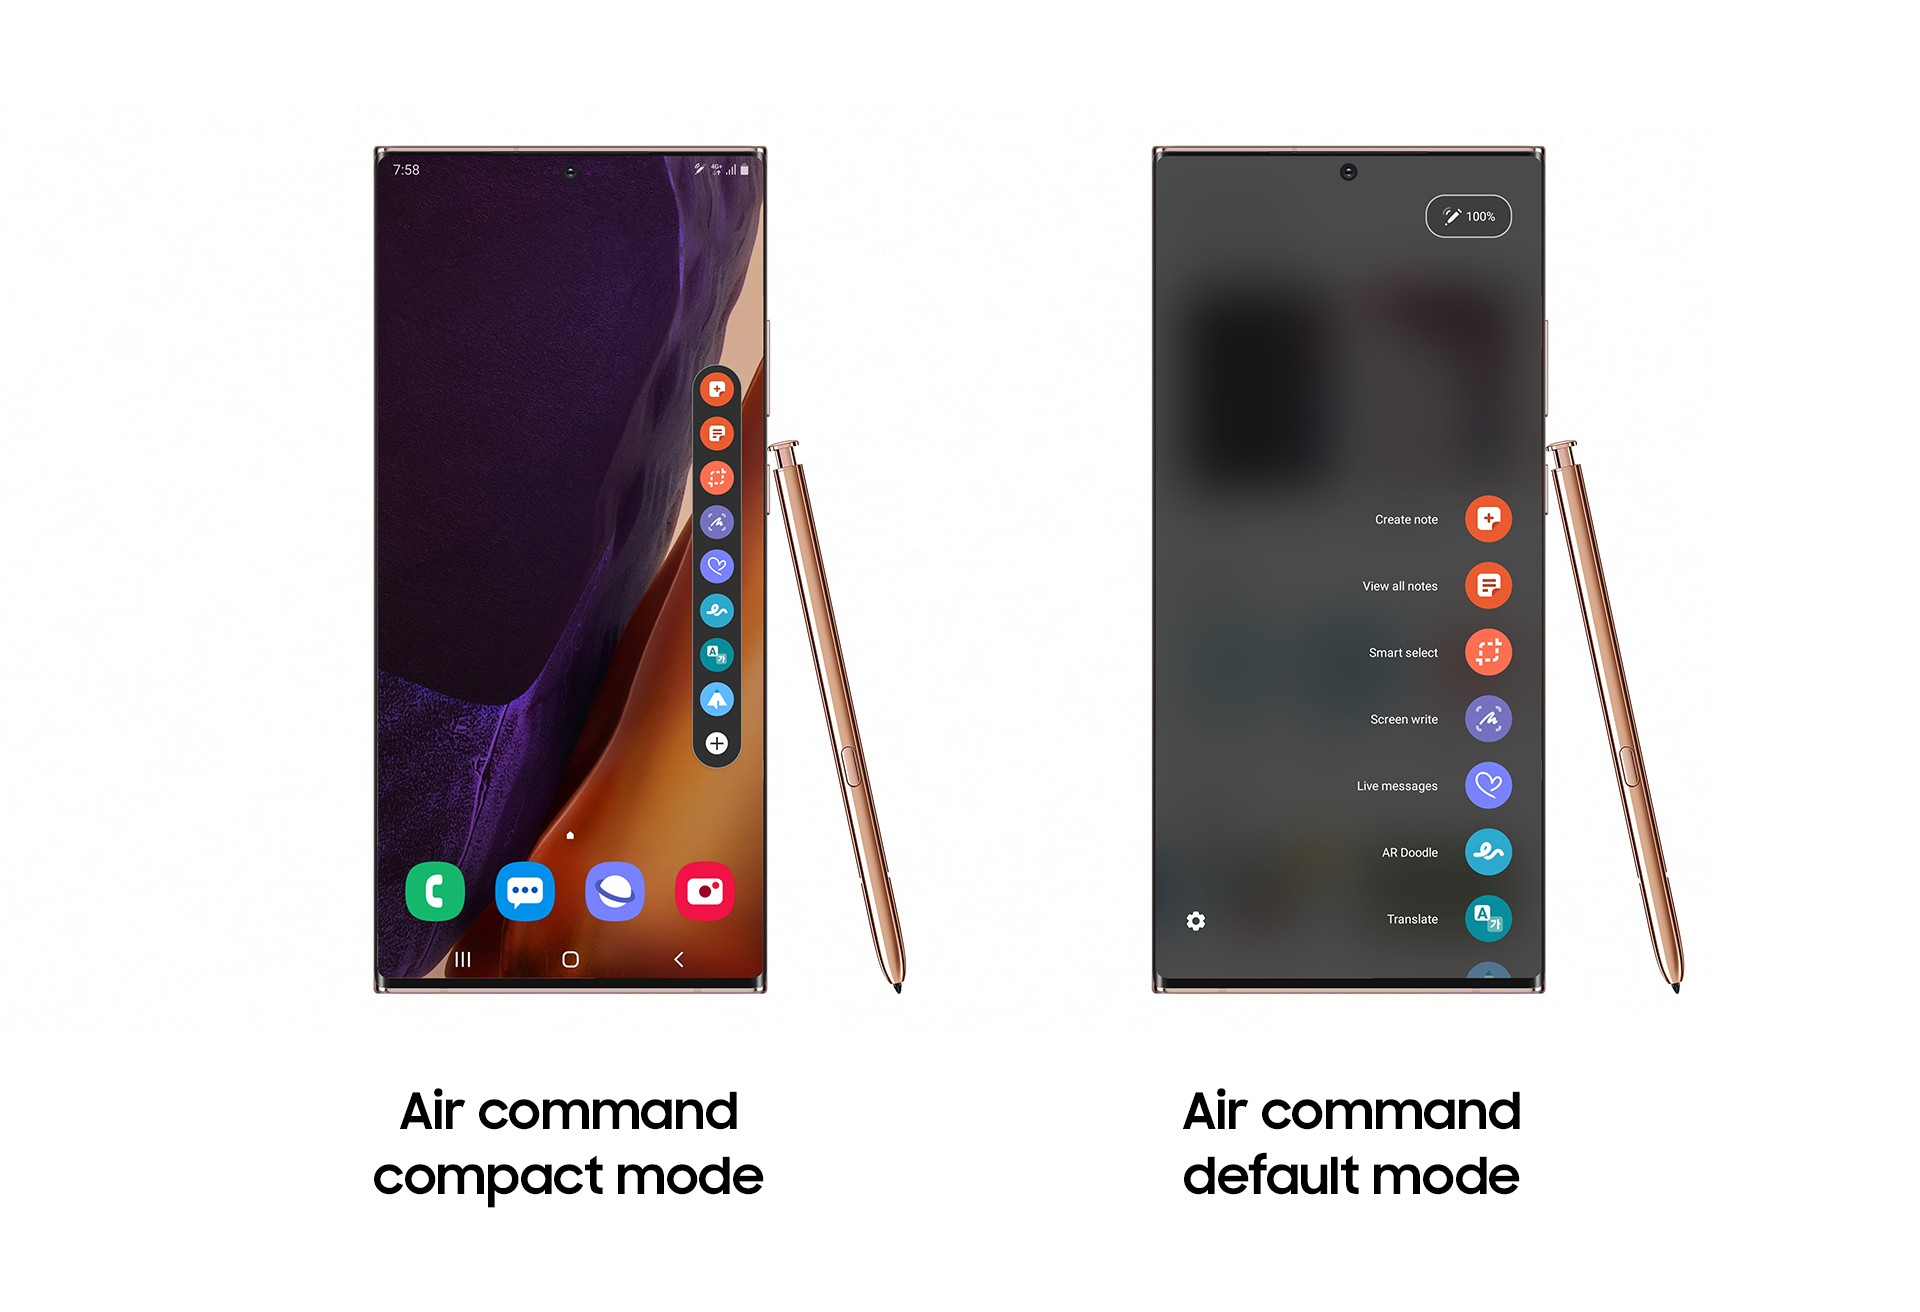 Comparison of Air command default mode and compact mode